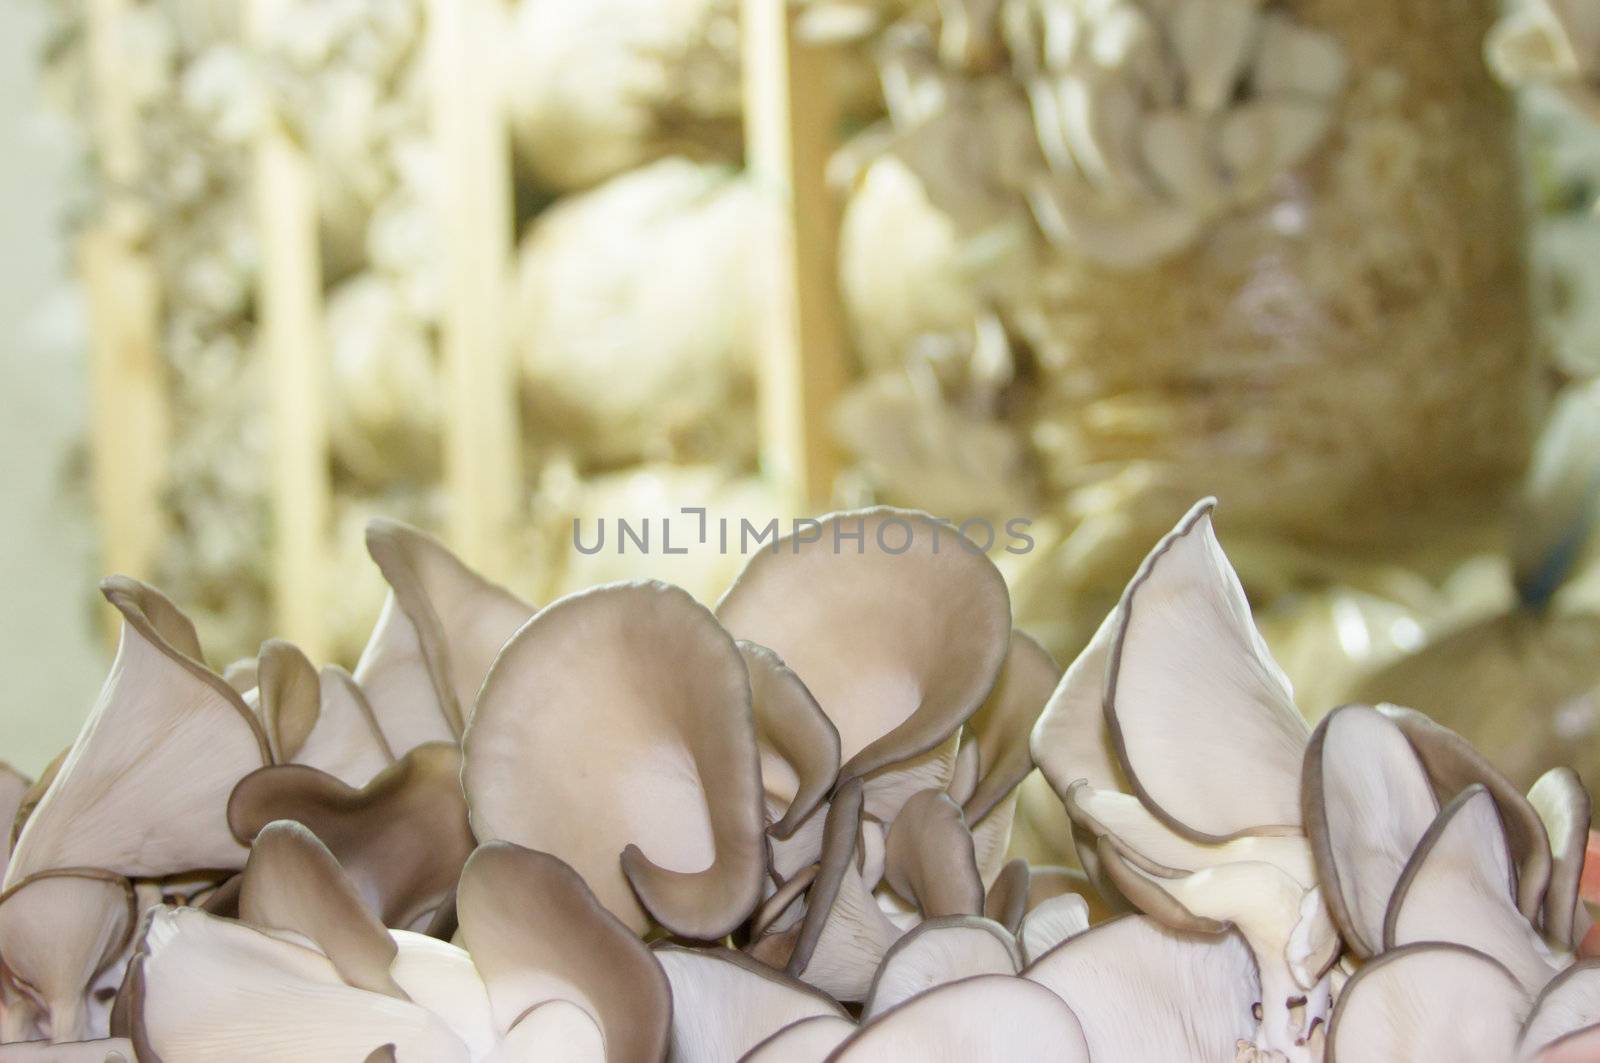 Oyster mushrooms cultivation by Angel_a